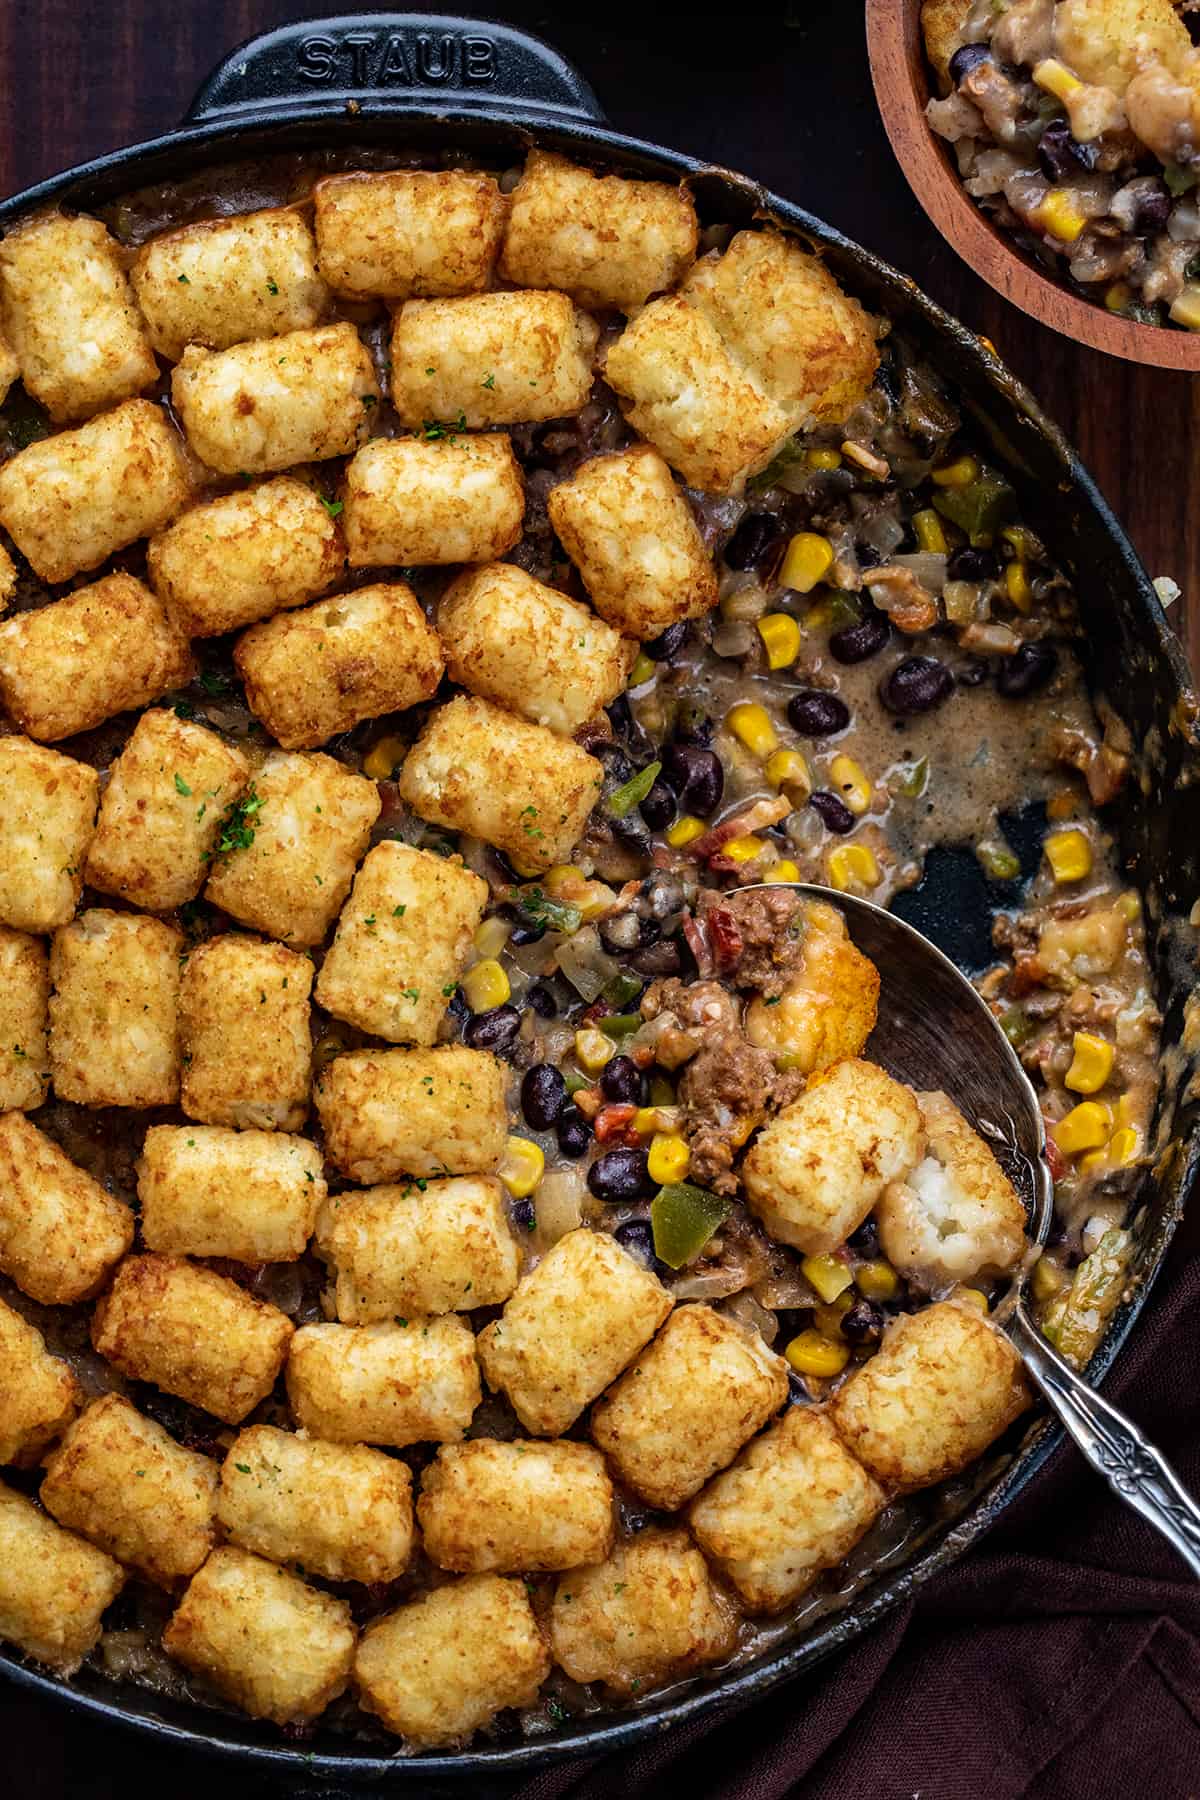 Skillet of Cowboy Tater Tot Casserole with Some Removed in a Bowl and a Spoon Resting in the pan.